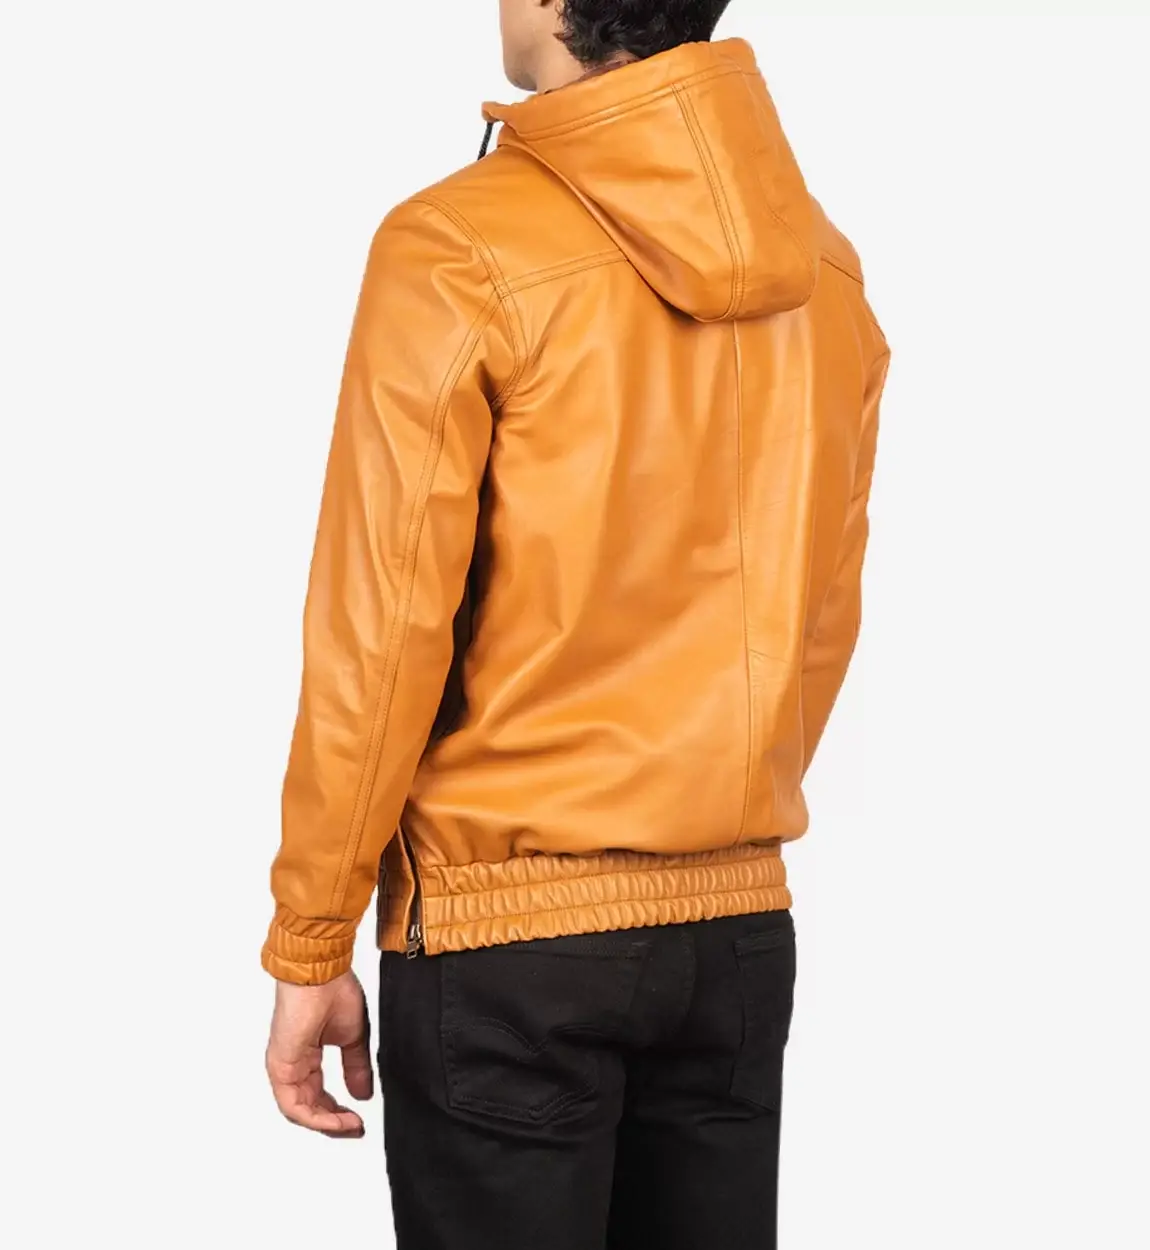 hooded_leather_jacket2_TendonSports